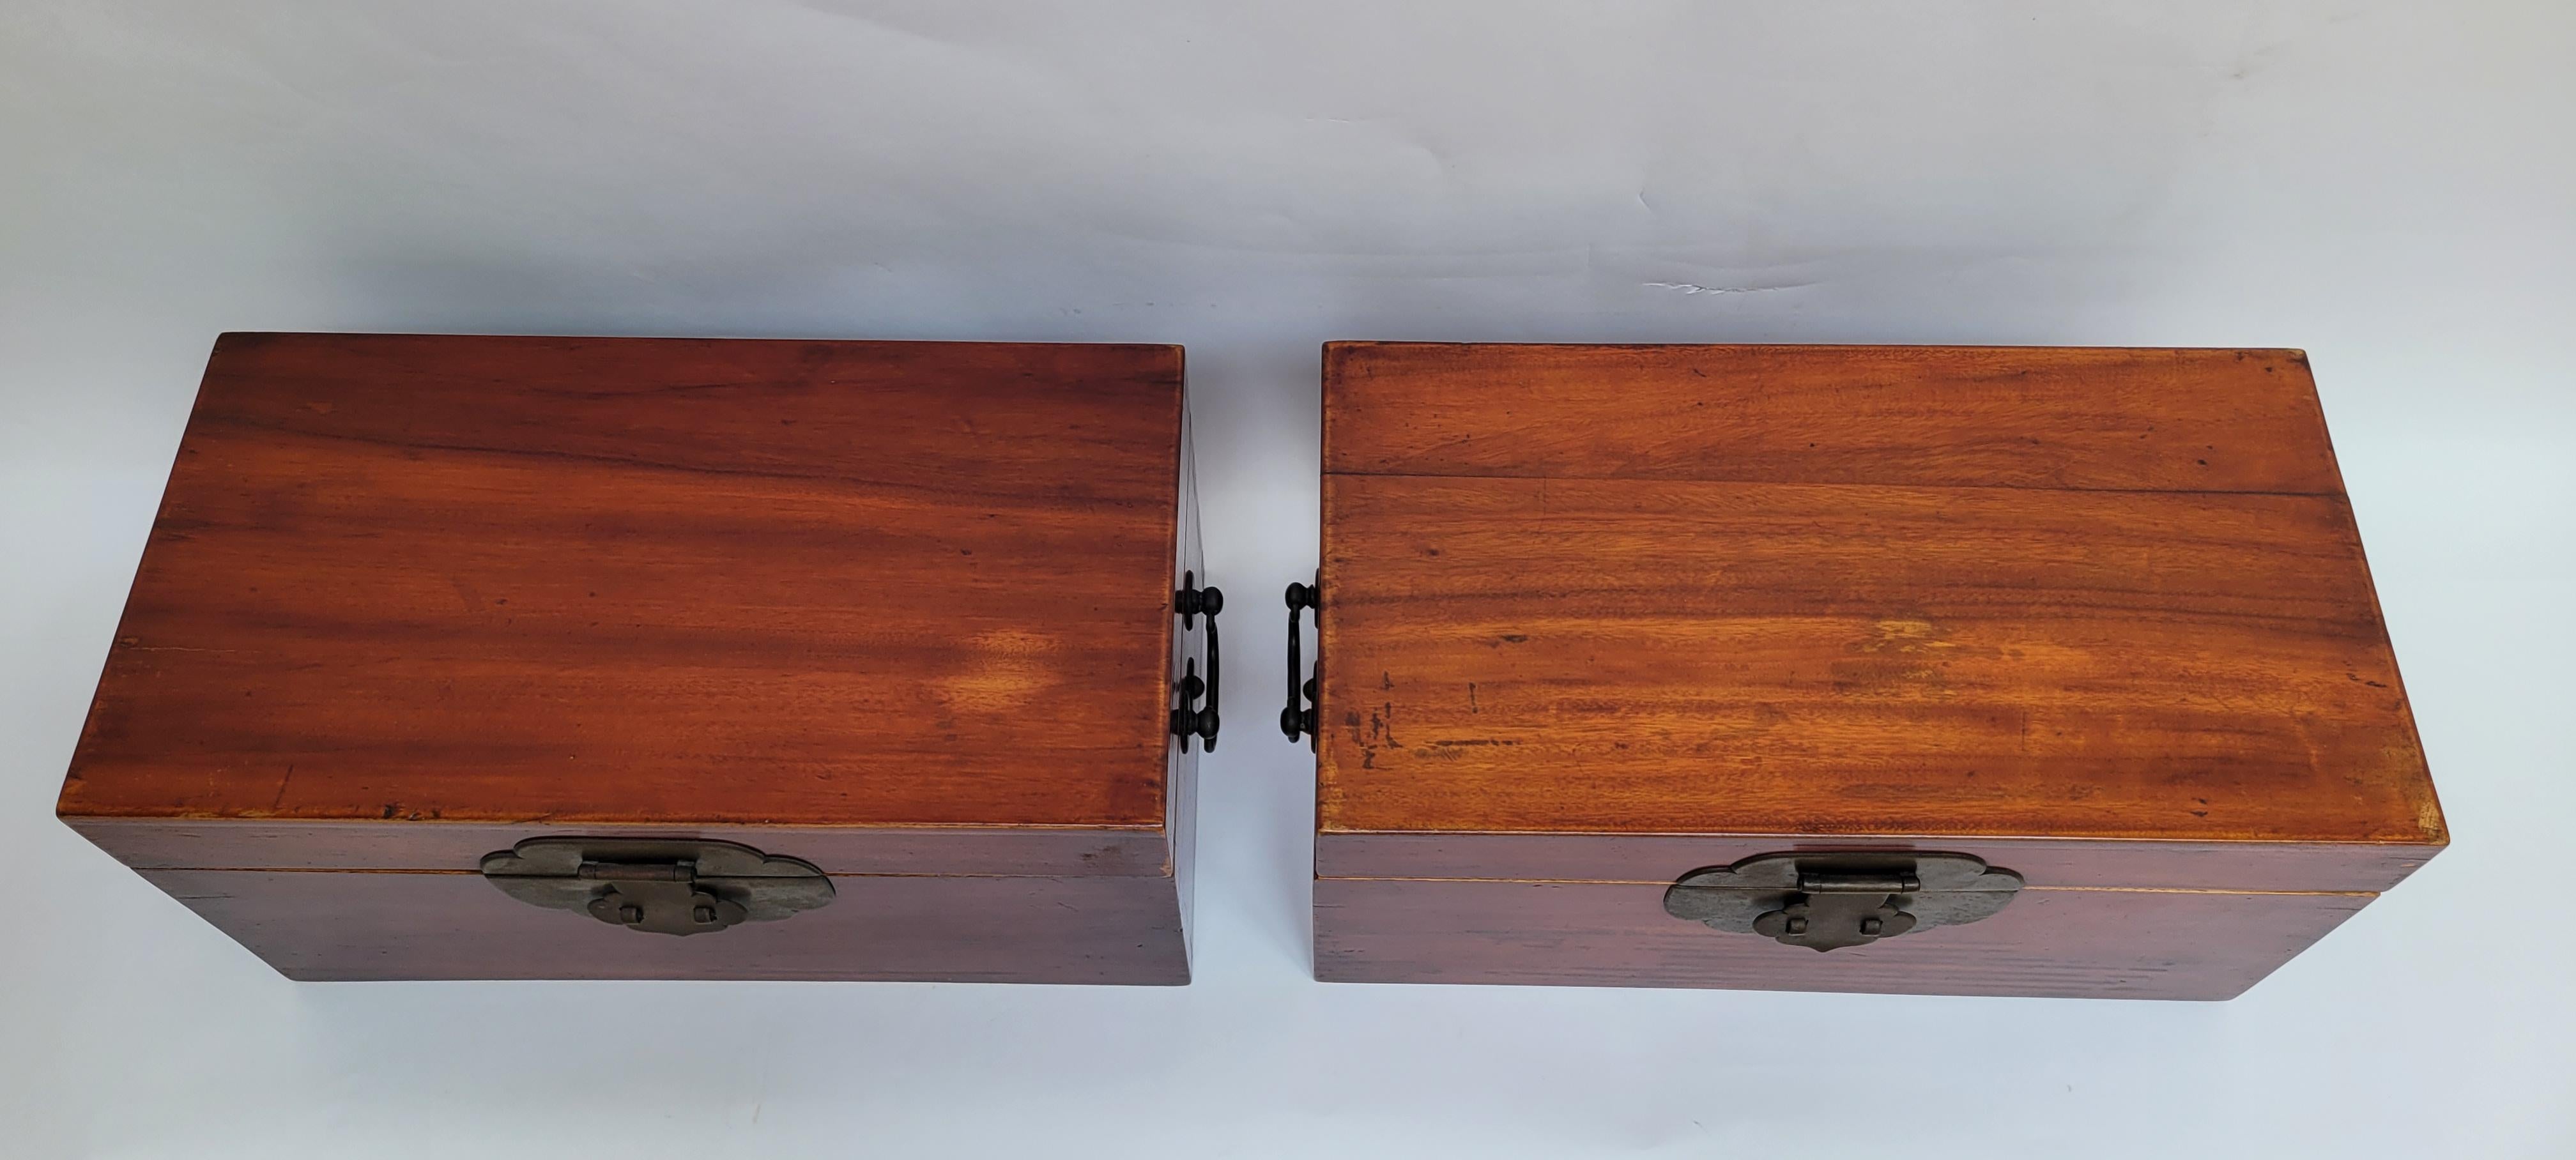 This pair of camphor storage boxes has its original lacquer finish. The construction is of standard mortise and tenon joints.